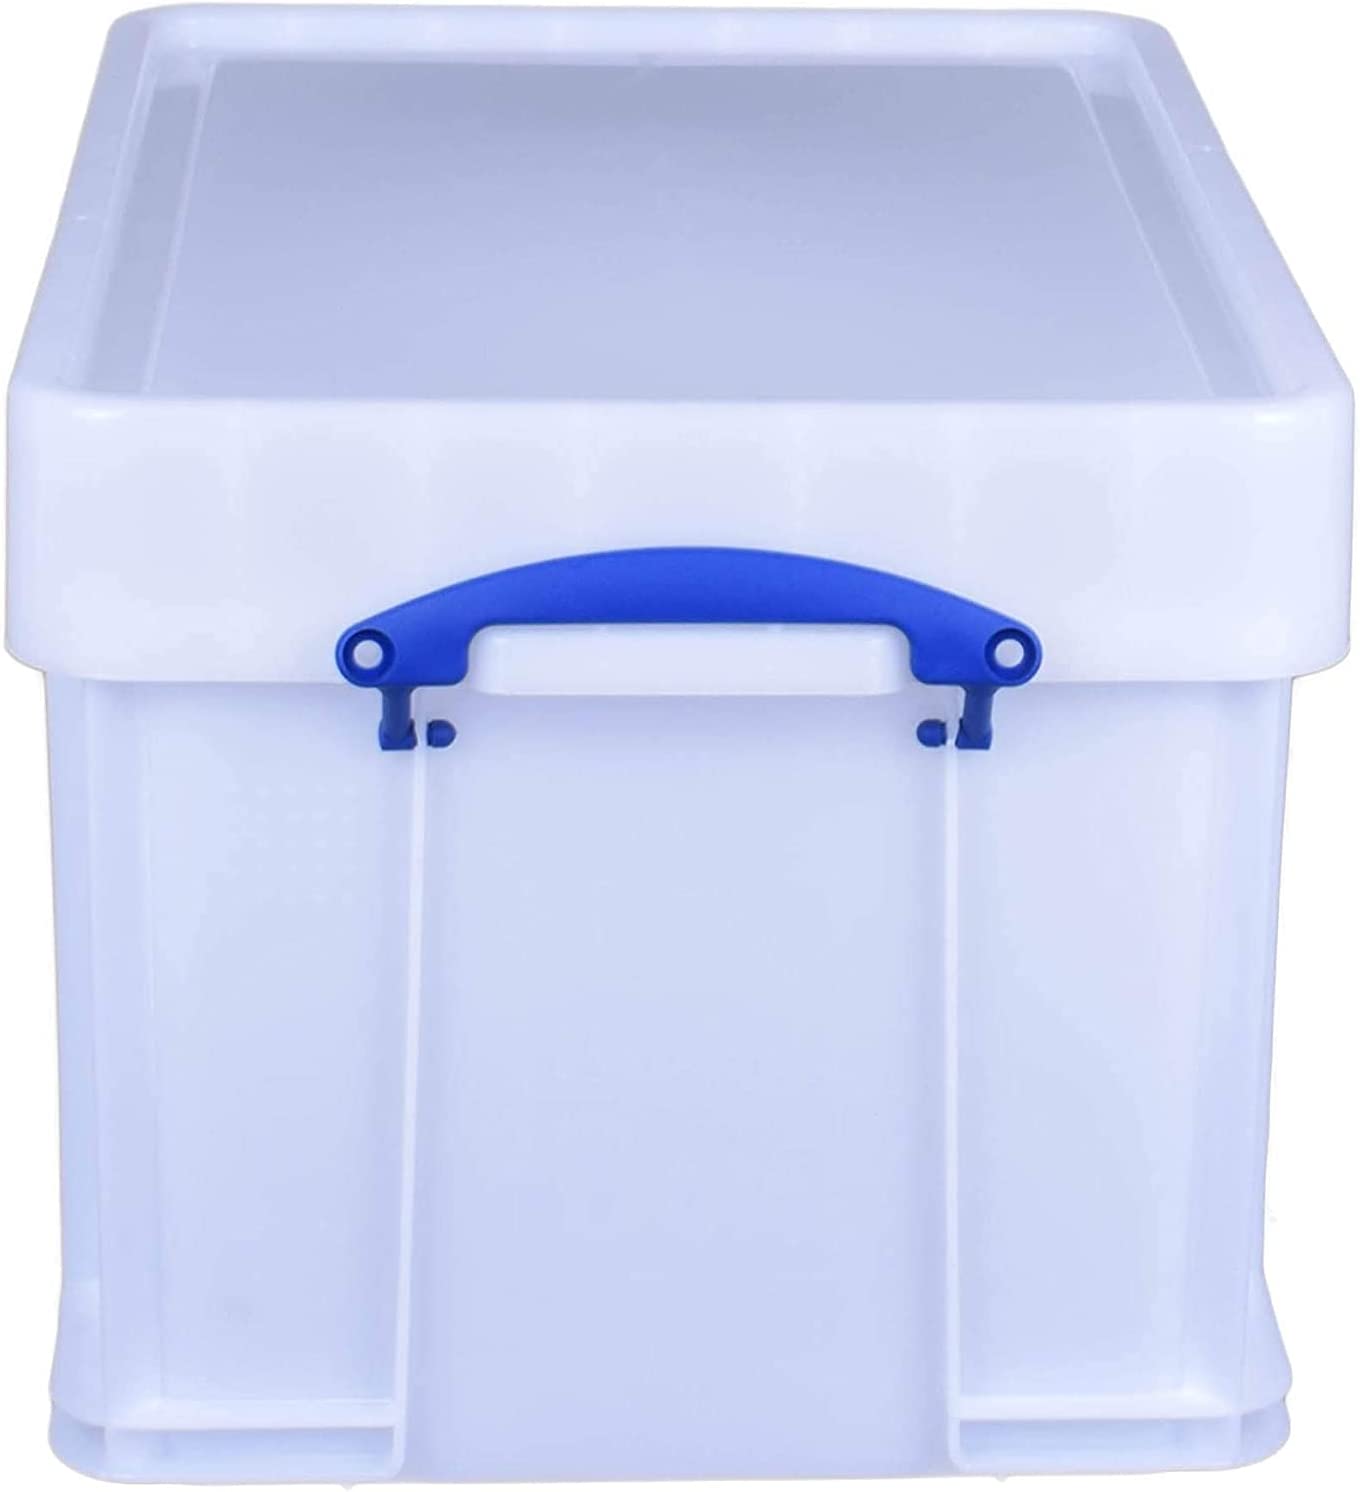 48 Litre XL Extra Strong Box (White)